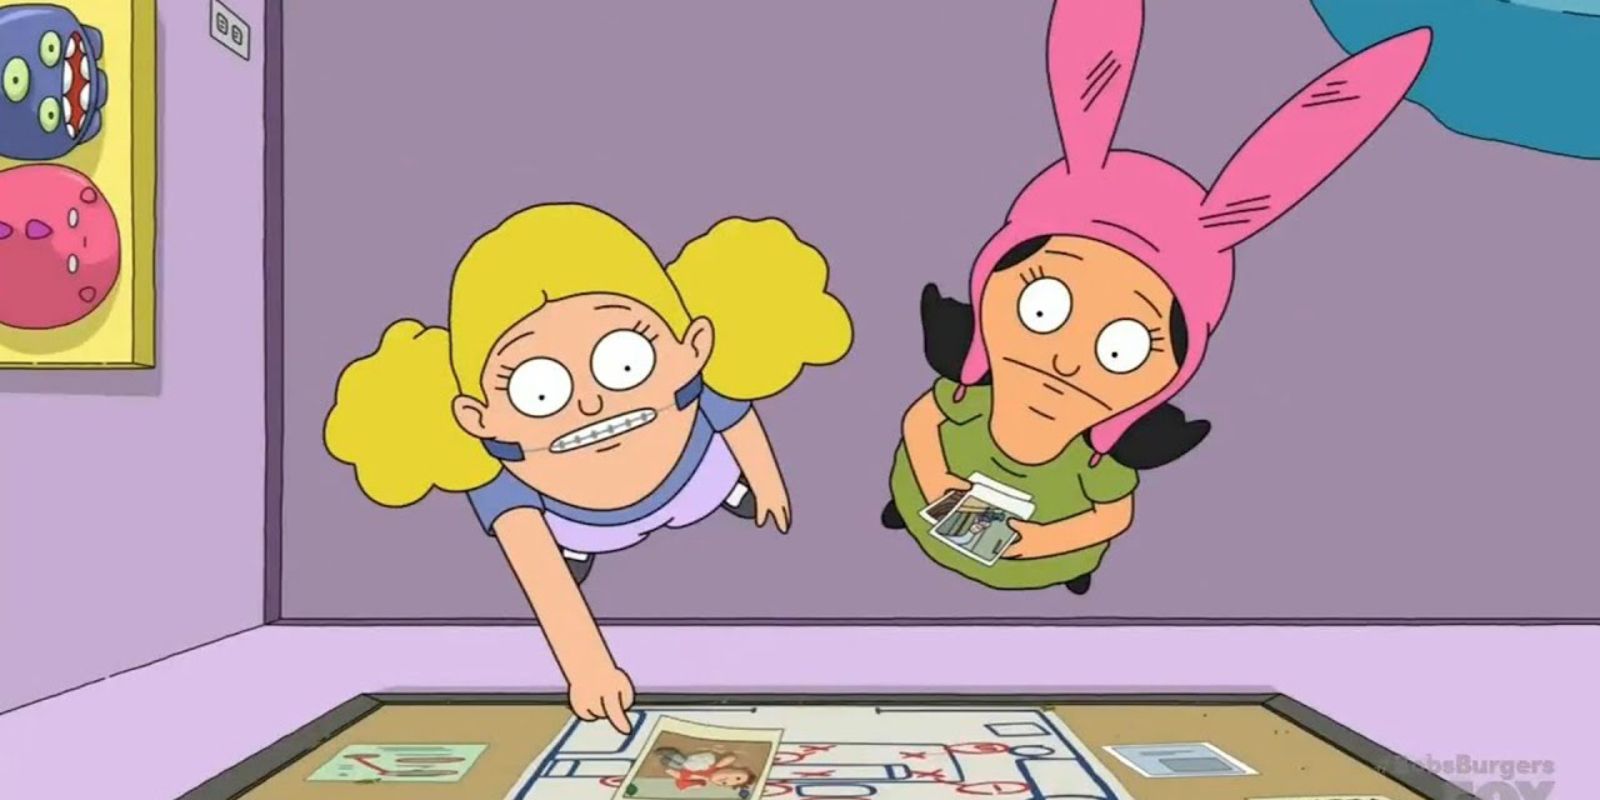 the silence of Louise , bobs burgers best episodes